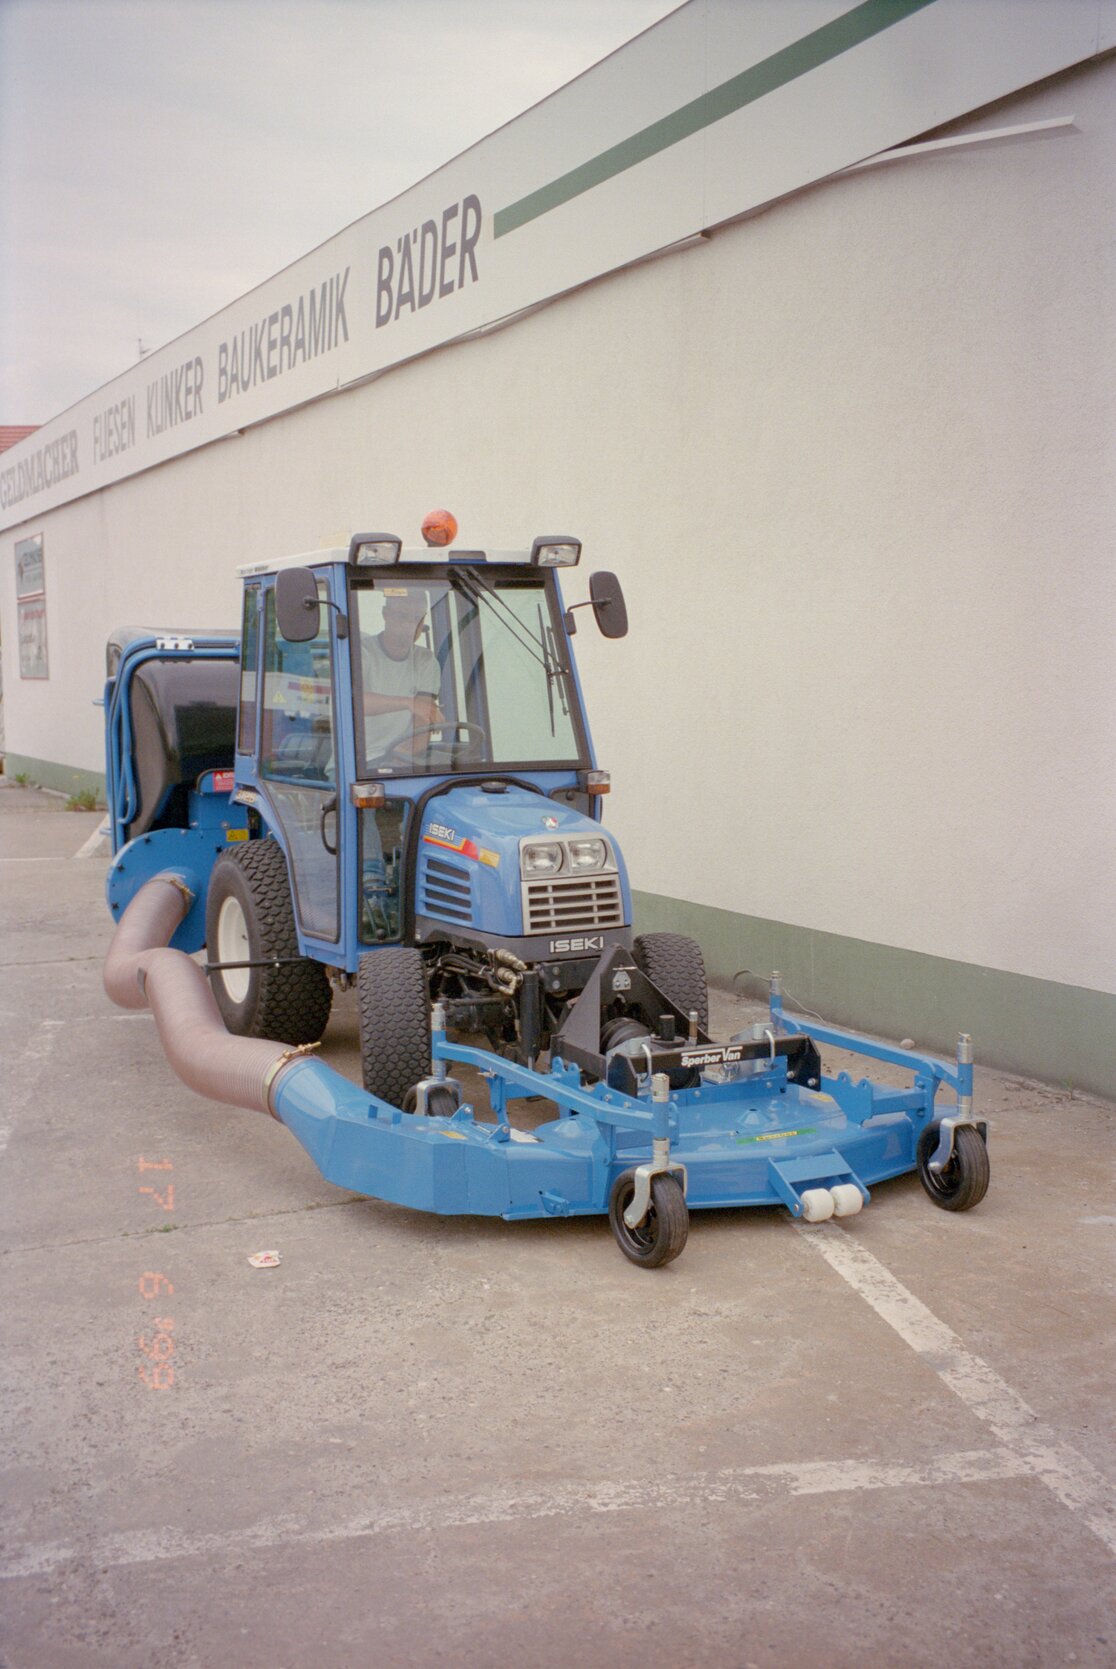 Thanks to Sperber, the Iseki is transformed into a lawn mower. 